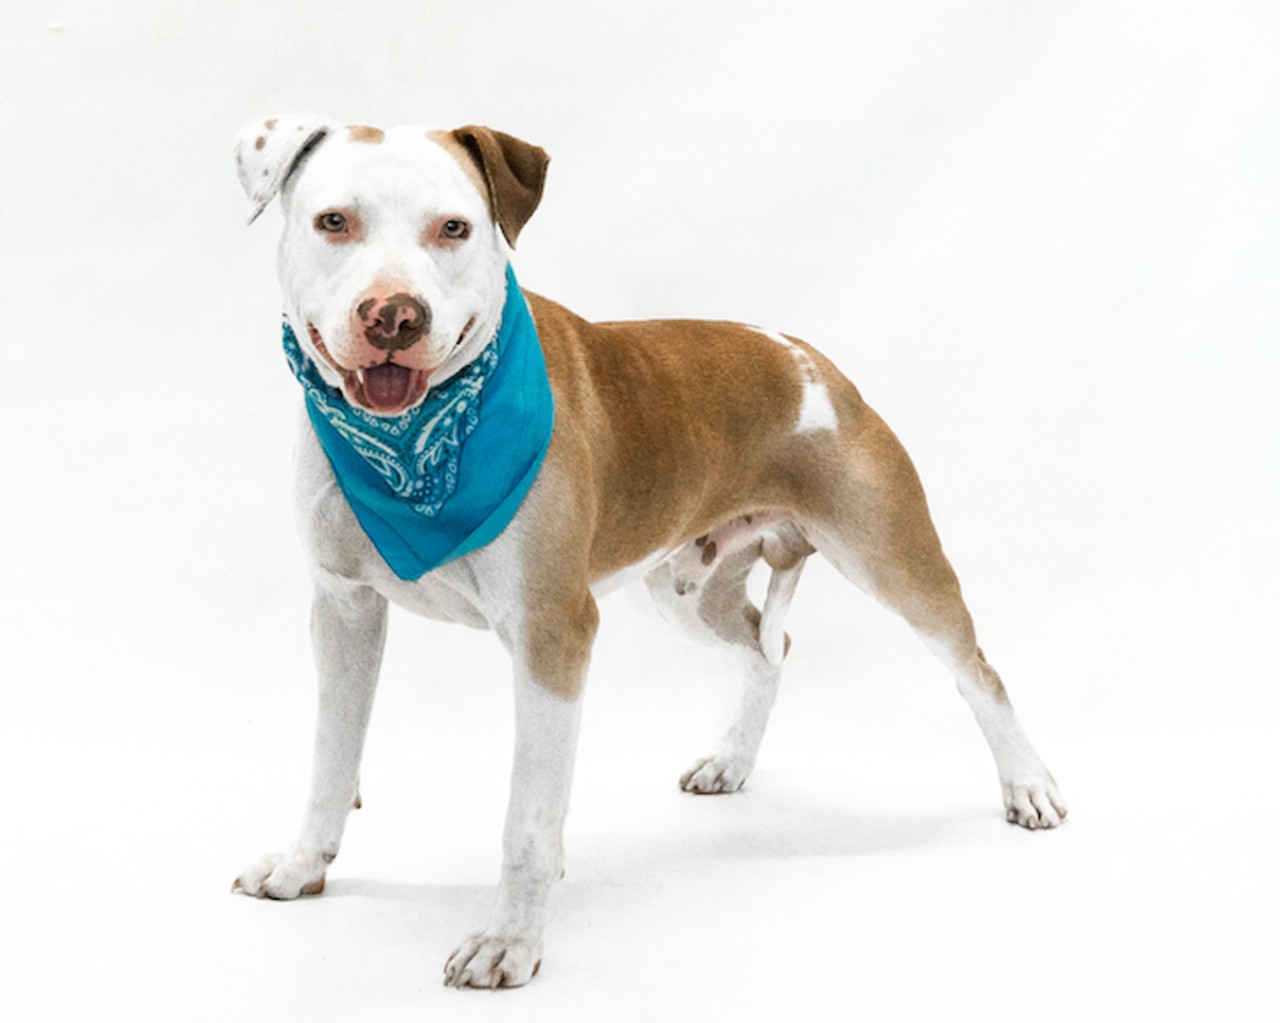 17 adoptable dogs available right now at Orange County Animal Services